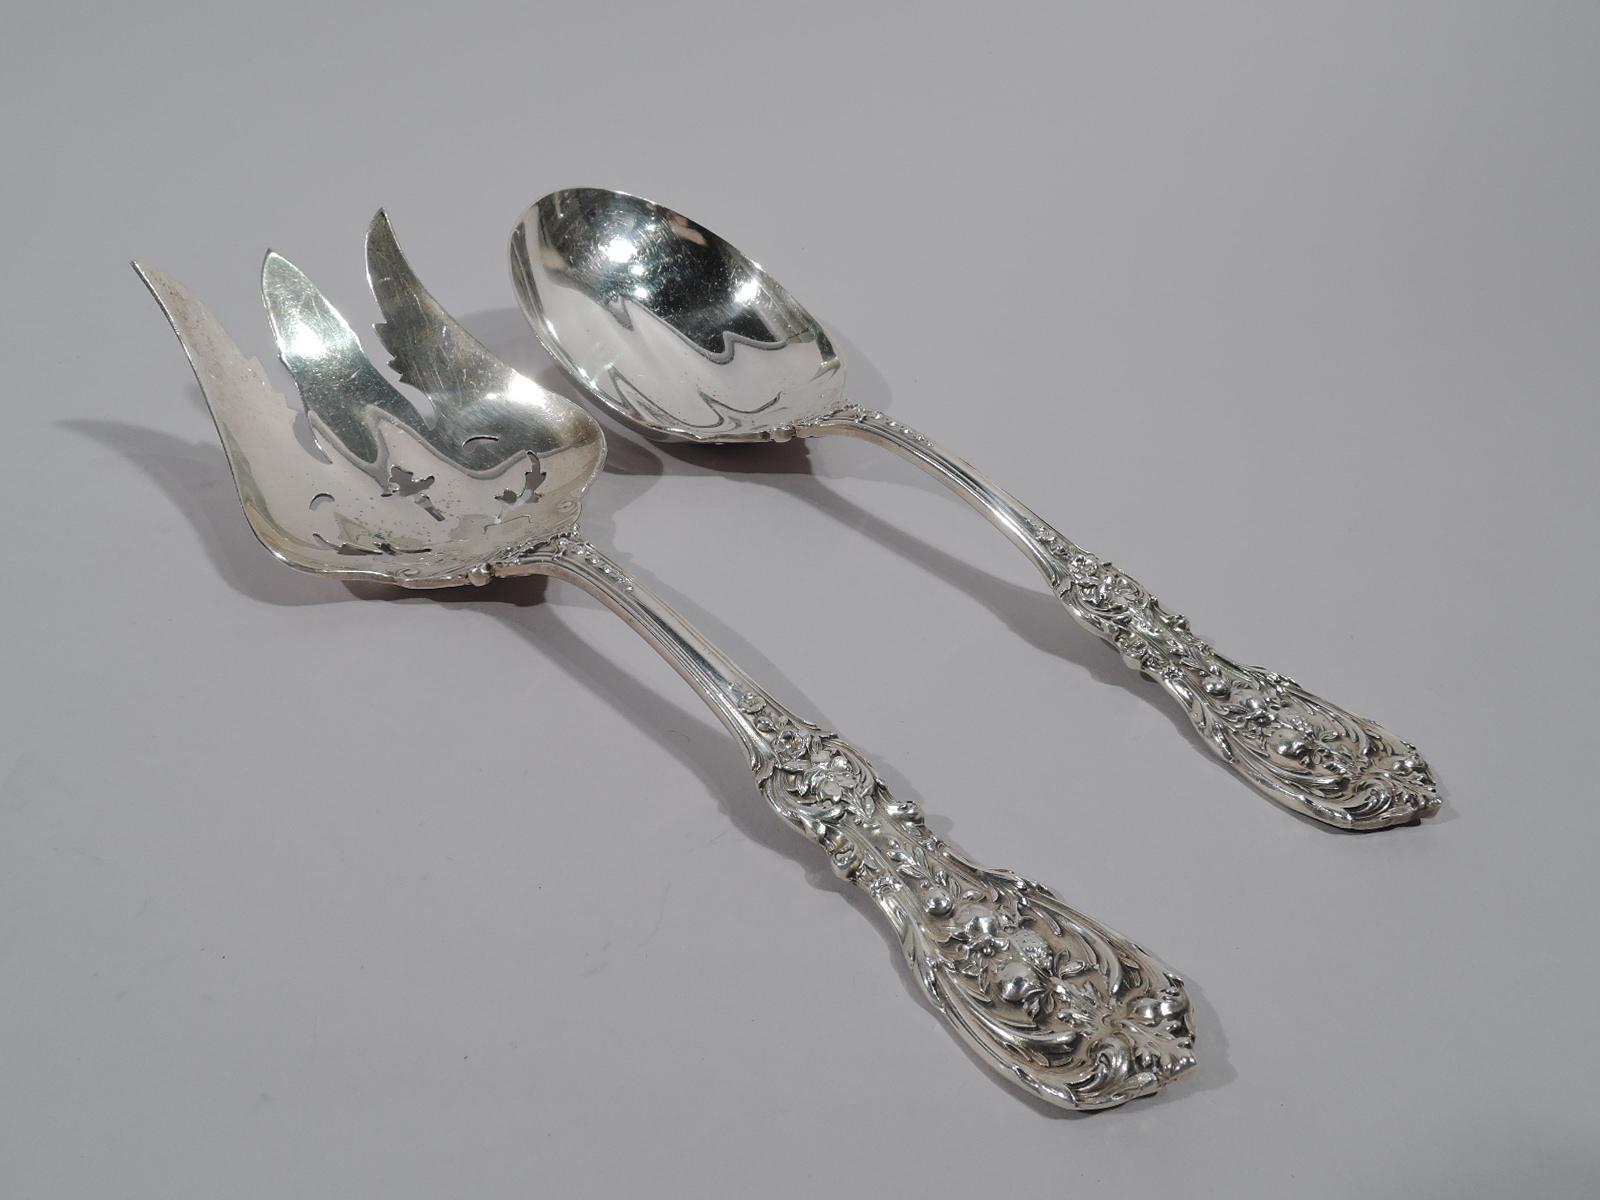 Sterling silver flatware set in Francis I pattern. Made by Reed & Barton in Taunton, Mass.

This set comprises 80 pieces (dimensions in inches): Forks: 10 regular forks (7 1/4) and 11 salad forks (6 1/8); Spoons: 11 teaspoons (6), 11 cream soup